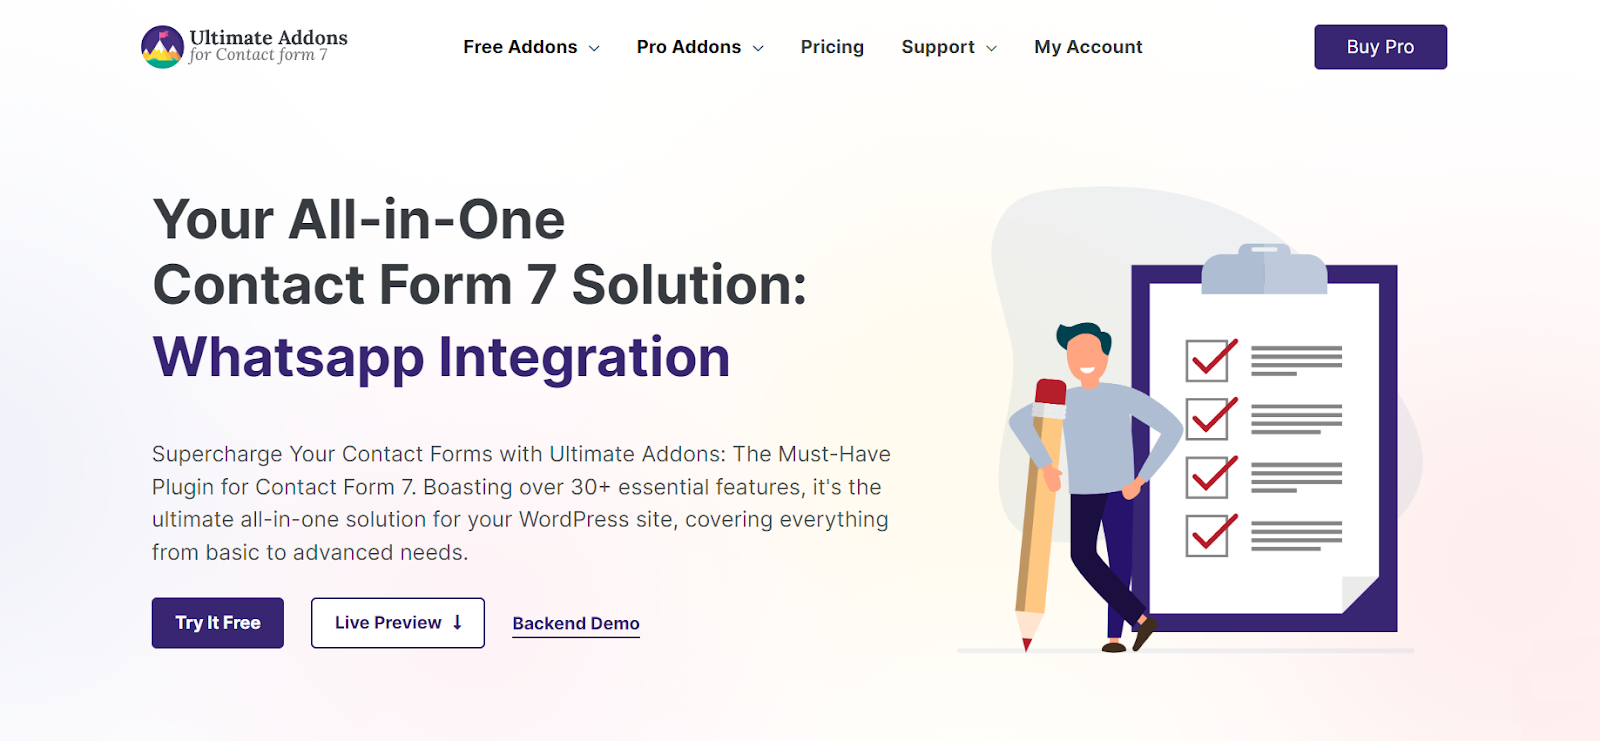 Get Creative Contact Form 7 features with Ultimate Addons